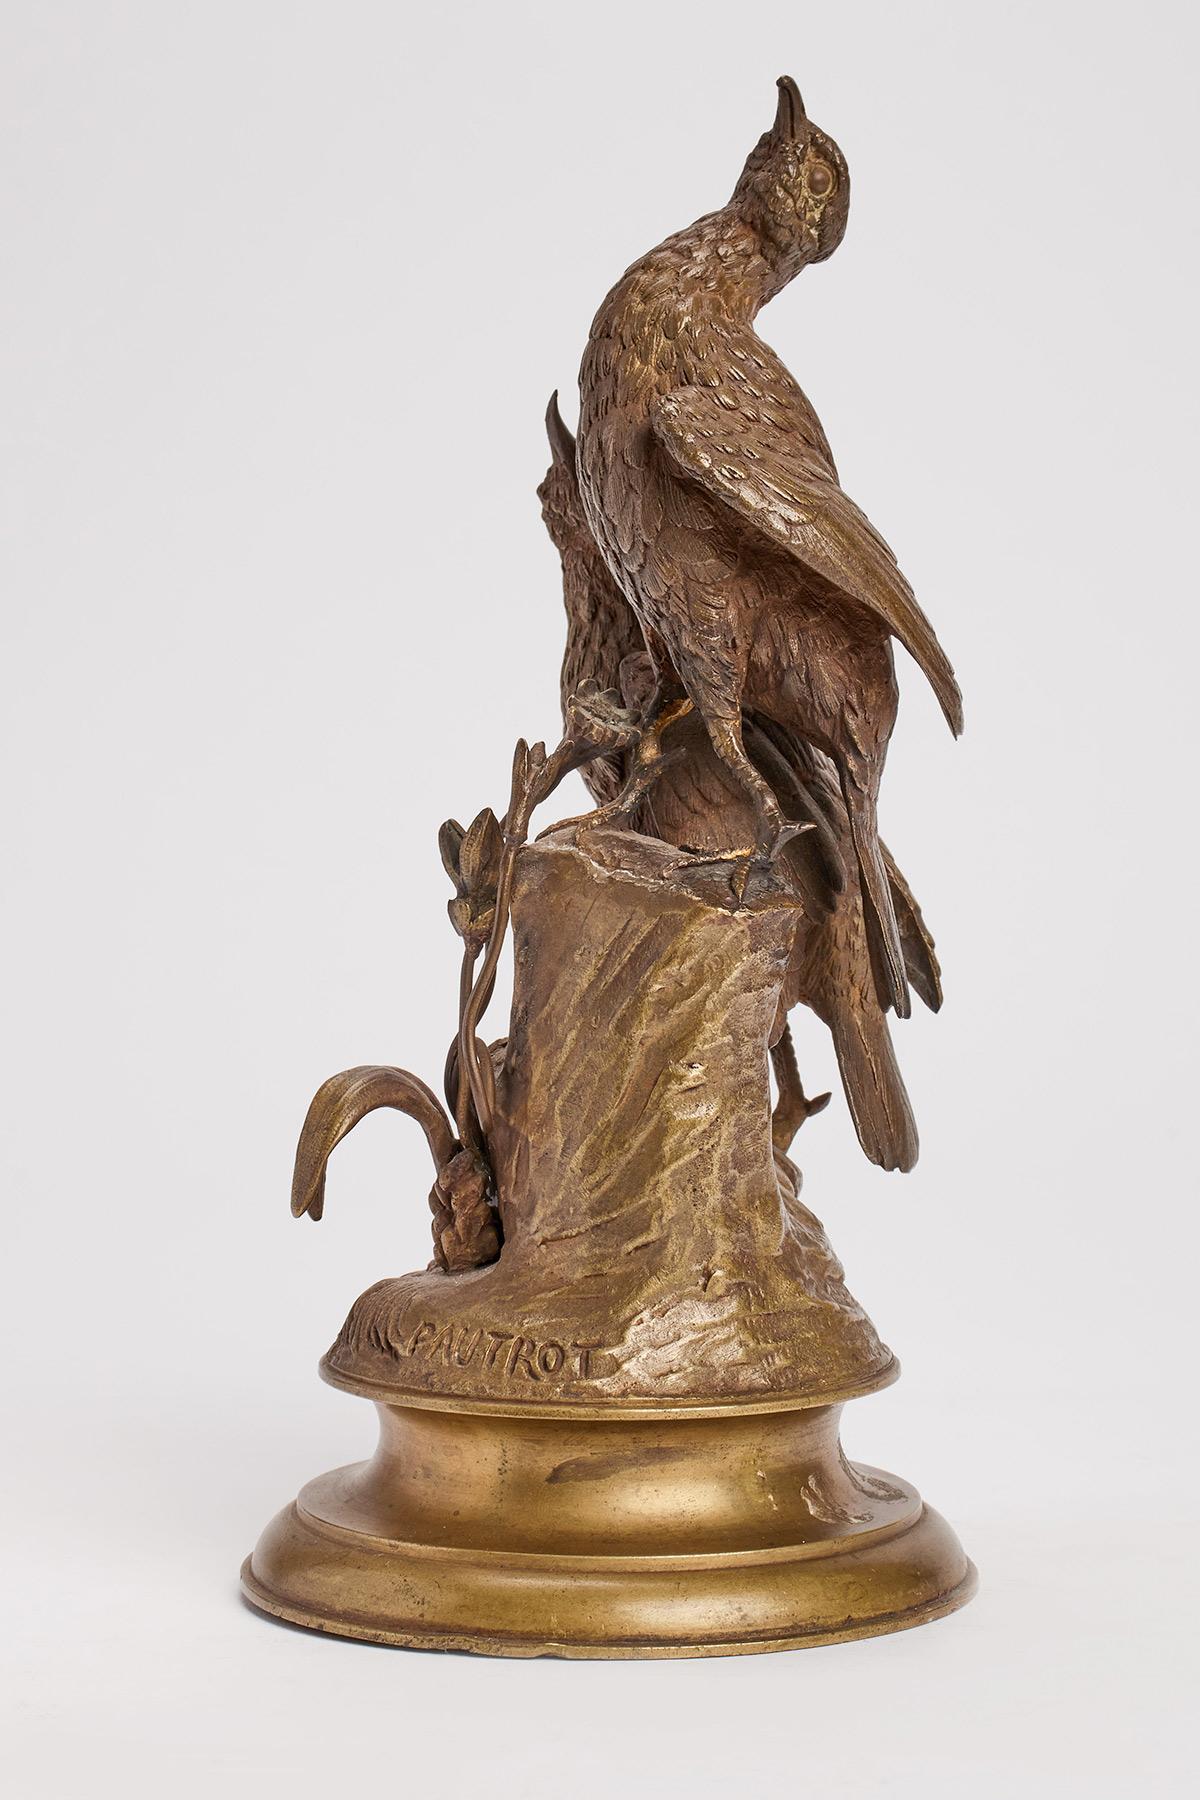 A bronze gilt sculpture of birds are standing over a tree trunk decorated with leaves and flowers. Round plane base. Signed Pautrot, France circa 1850.